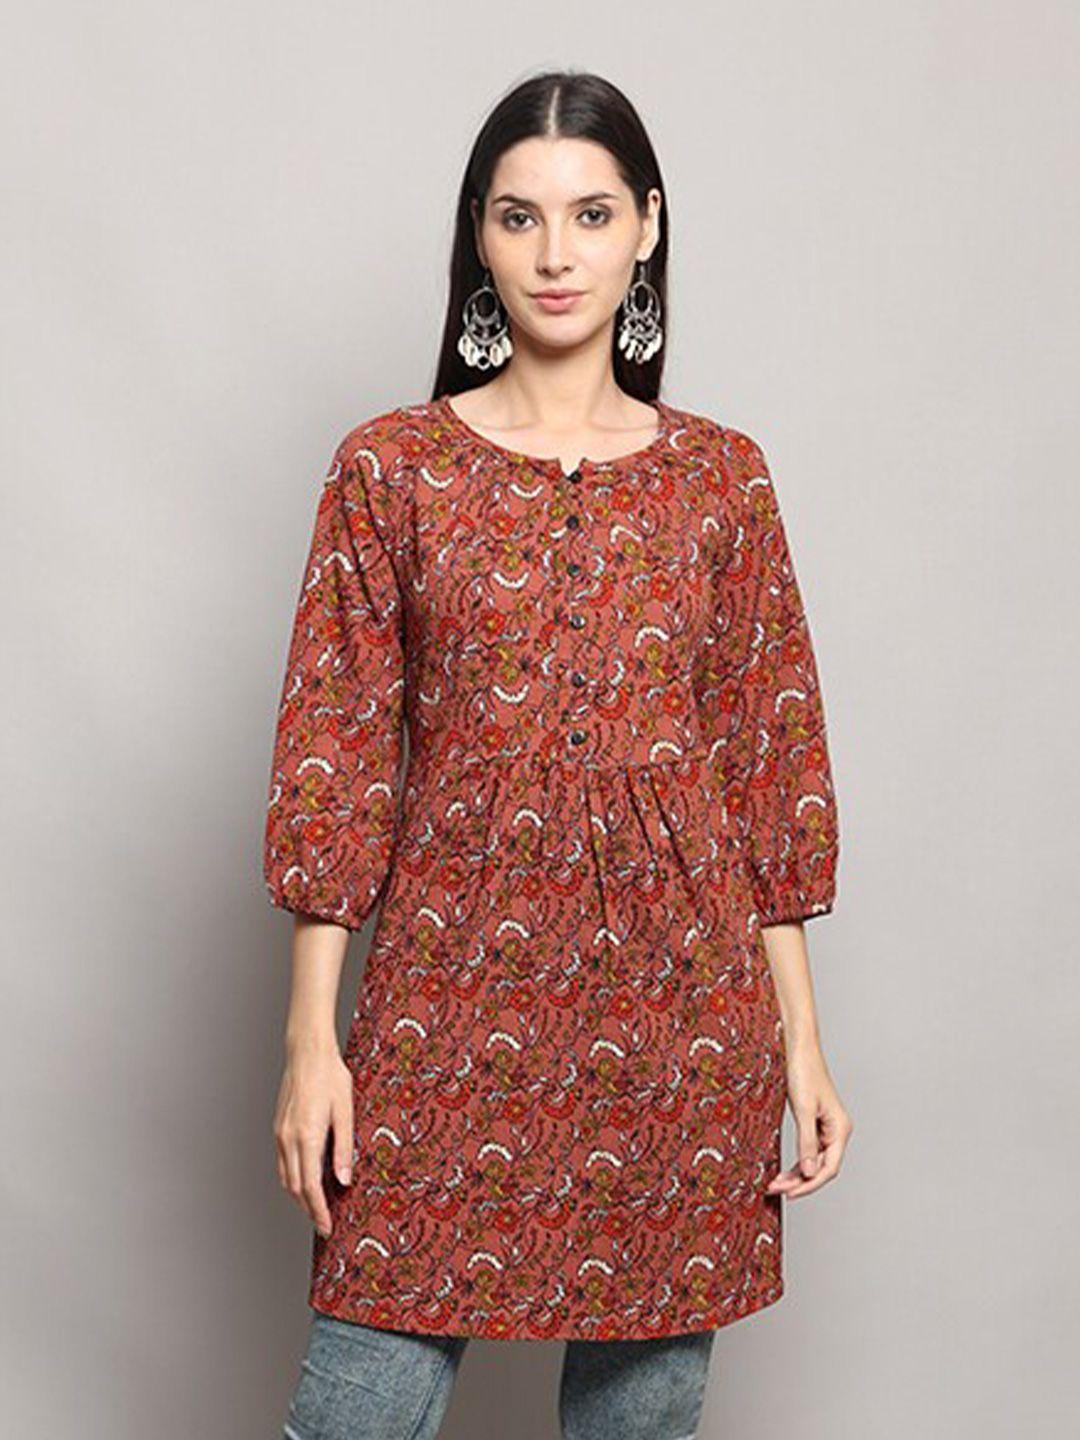 maiyee-brown-floral-print-maxi-top